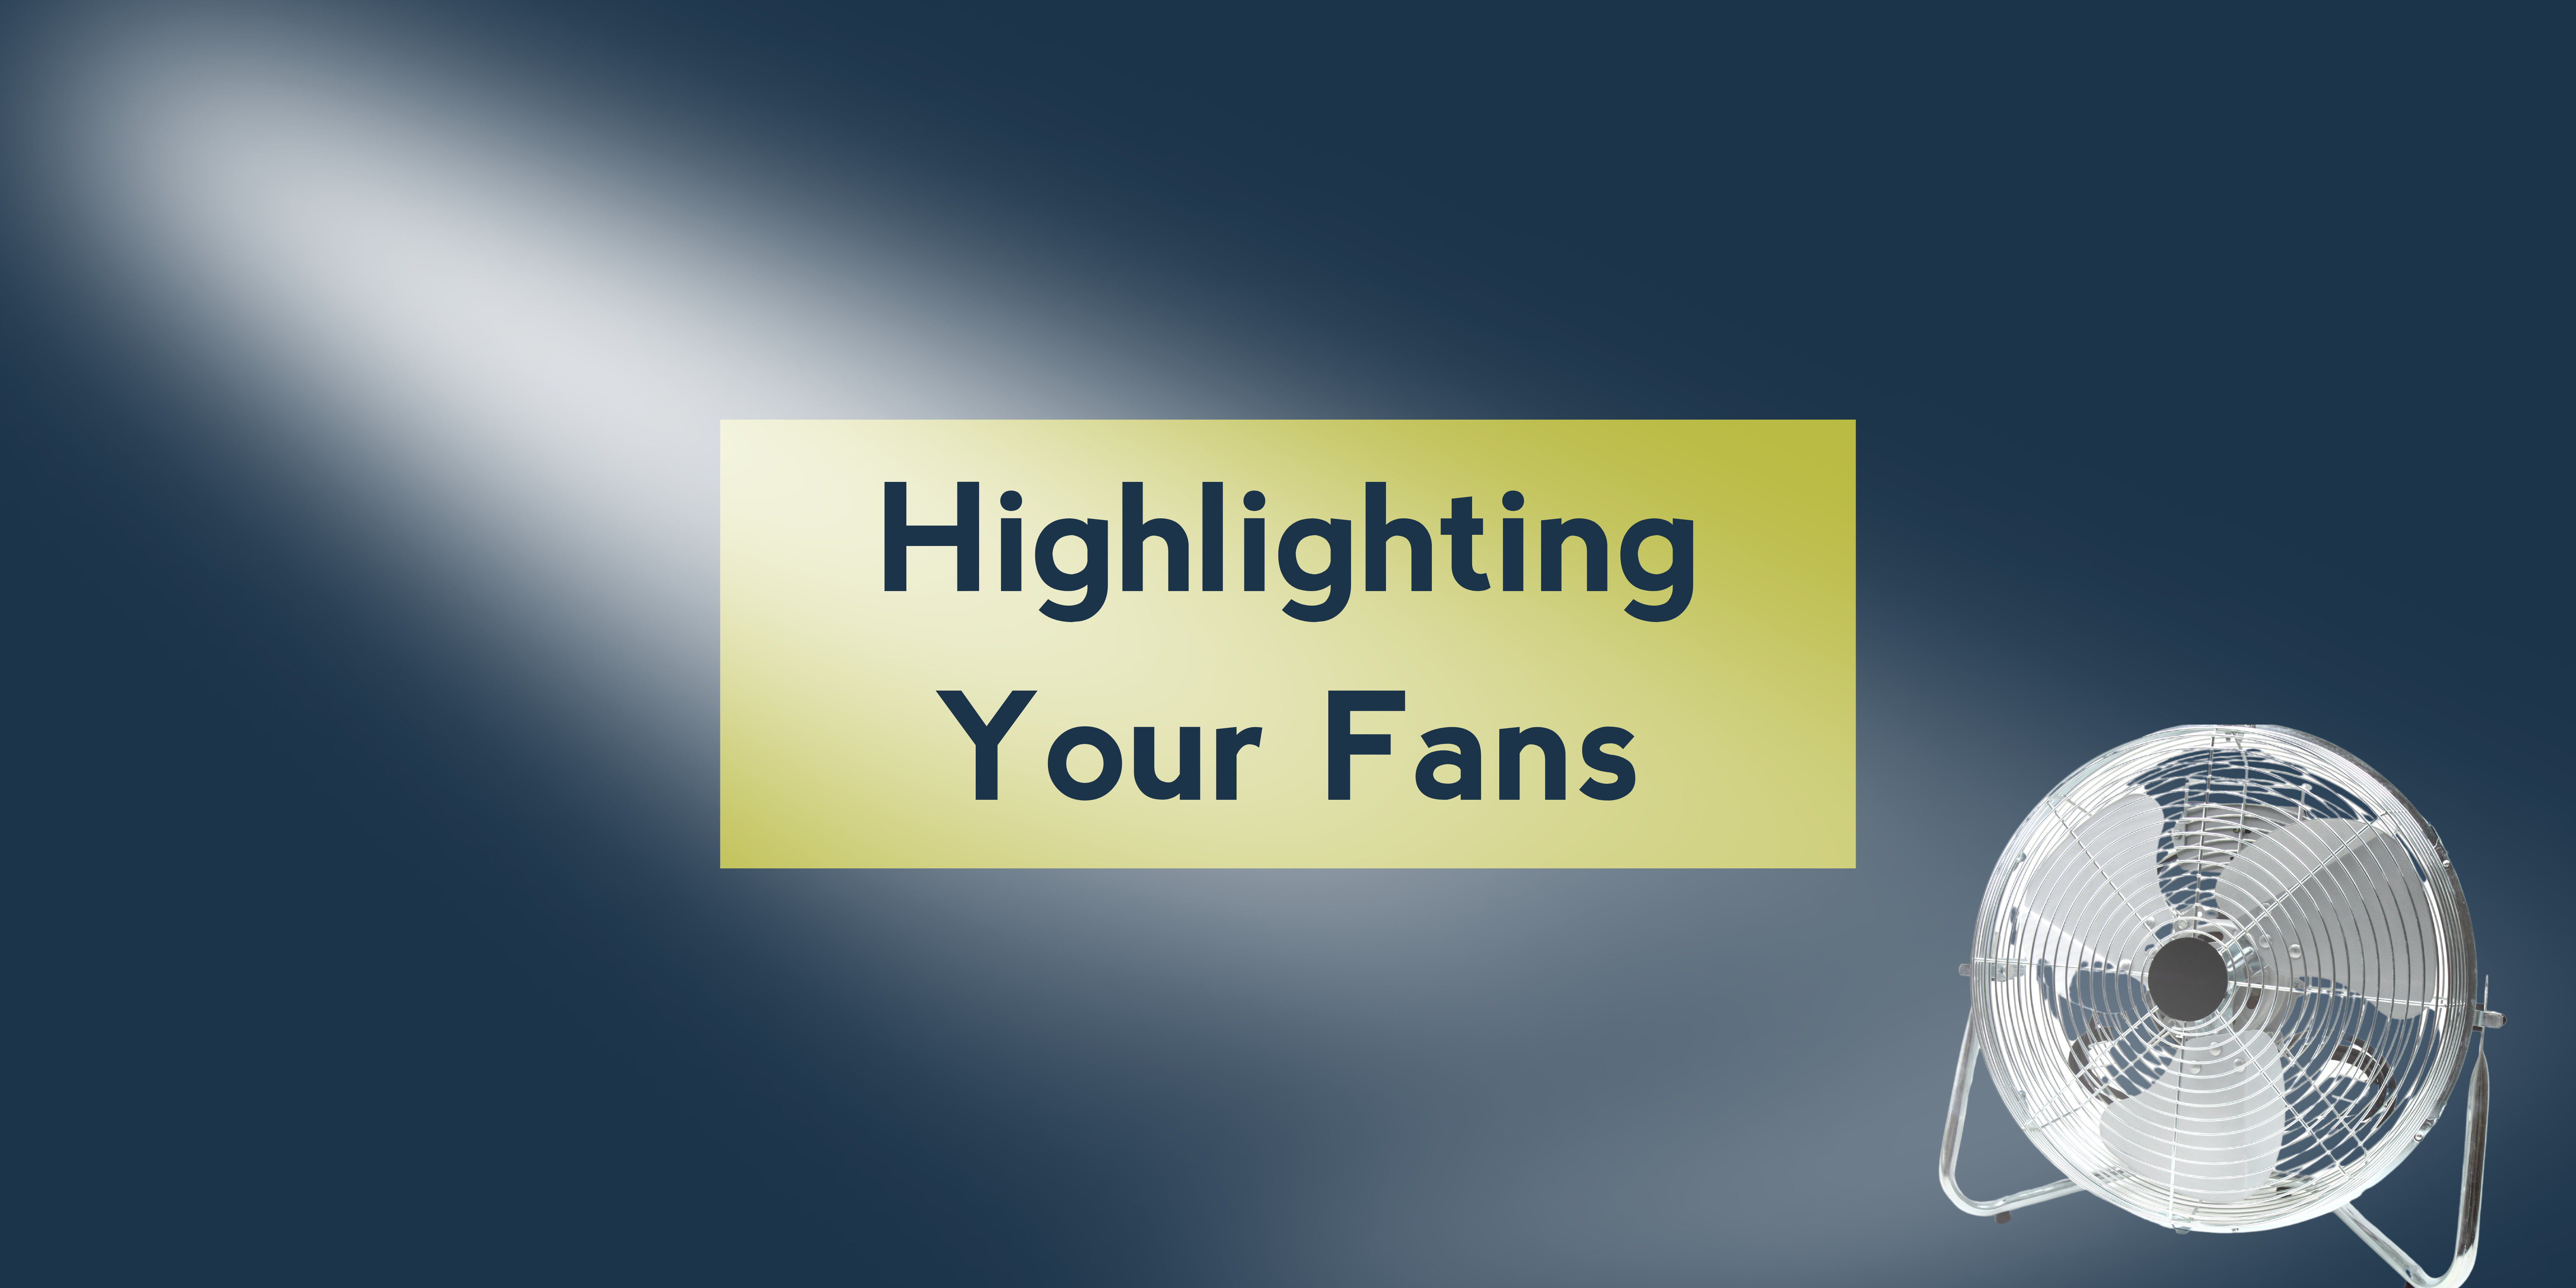 Highlighting Your Fans